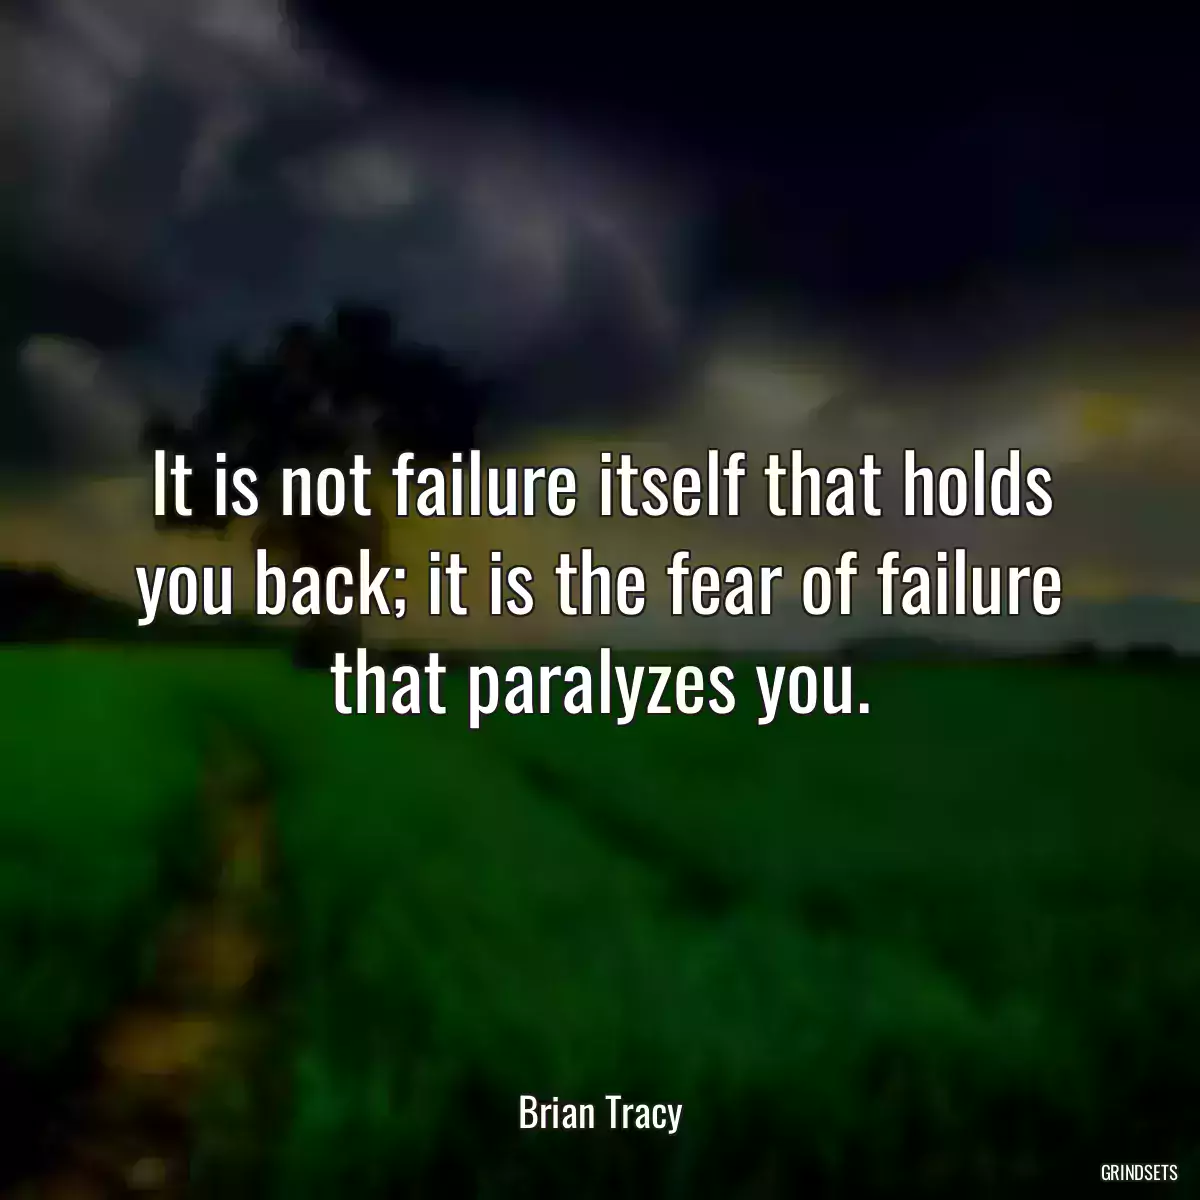 It is not failure itself that holds you back; it is the fear of failure that paralyzes you.